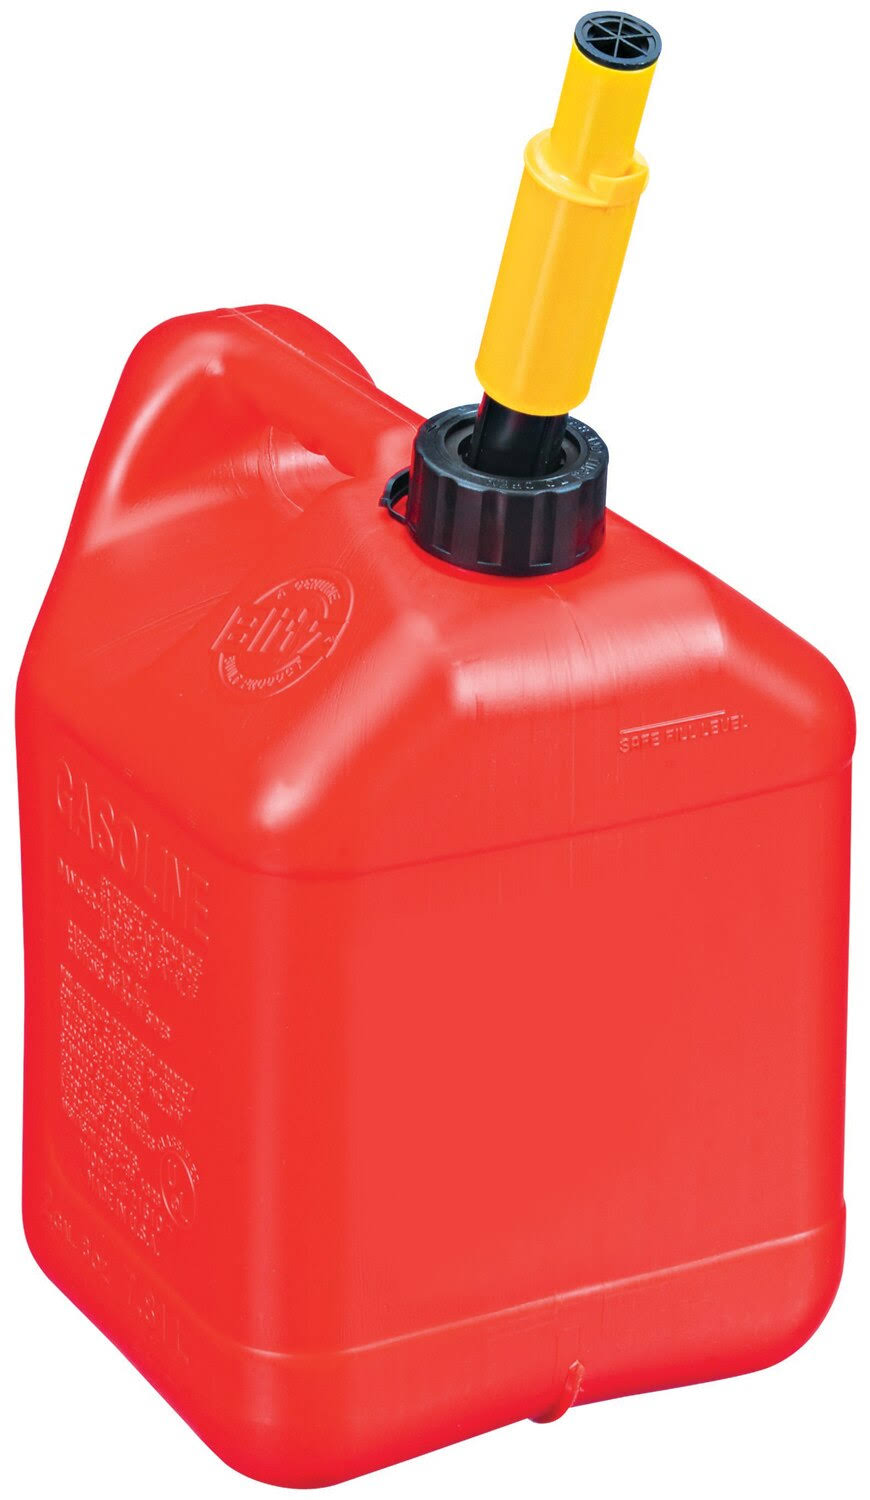 Midwest 2310 Portable High Density Polyethylene Gas Can - Red, 2gal